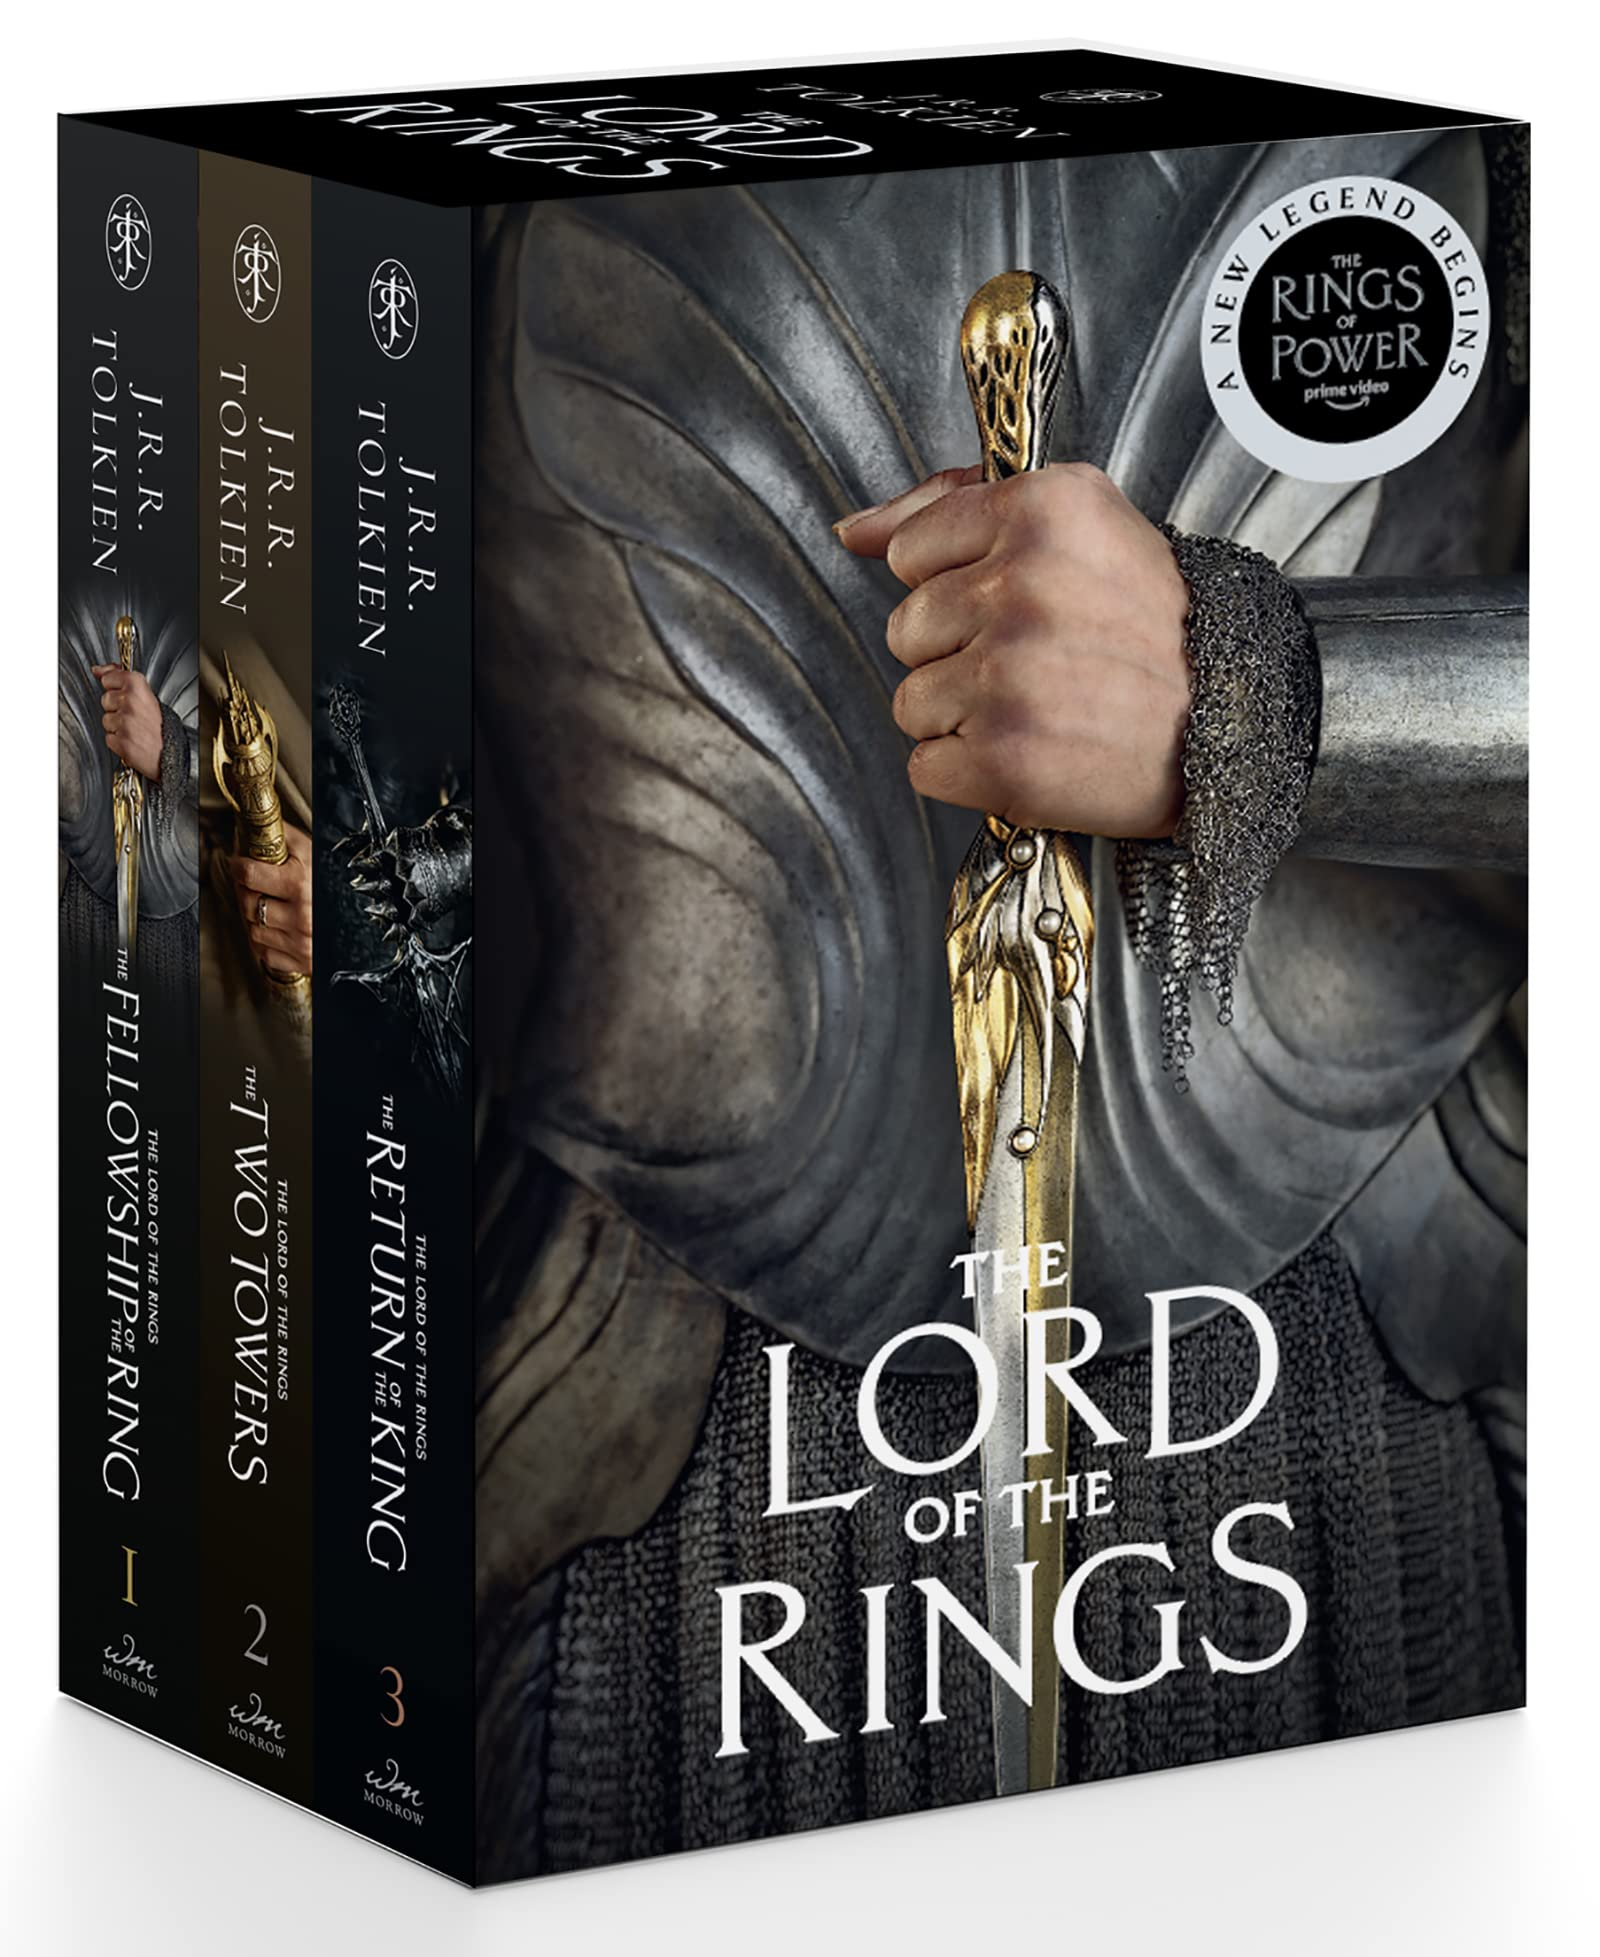 The Lord of the Rings Boxed set